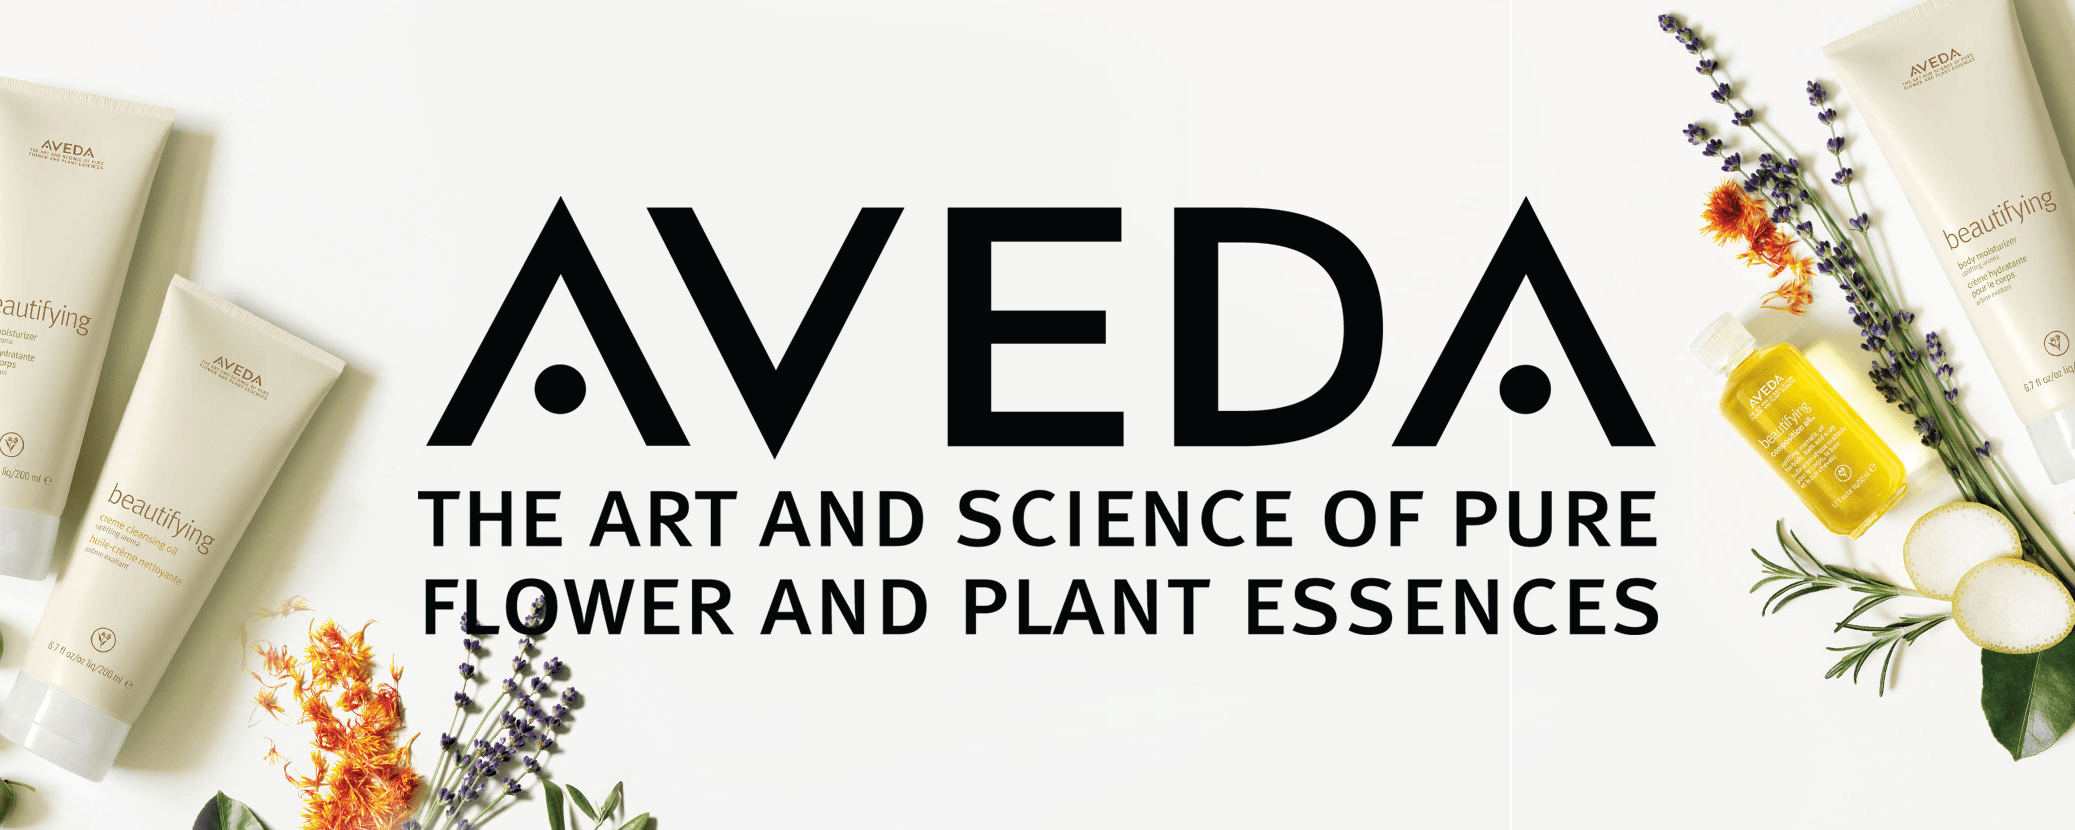 Aveda Logo - Aveda Products with Floral Background | Progressions Spa & Salon